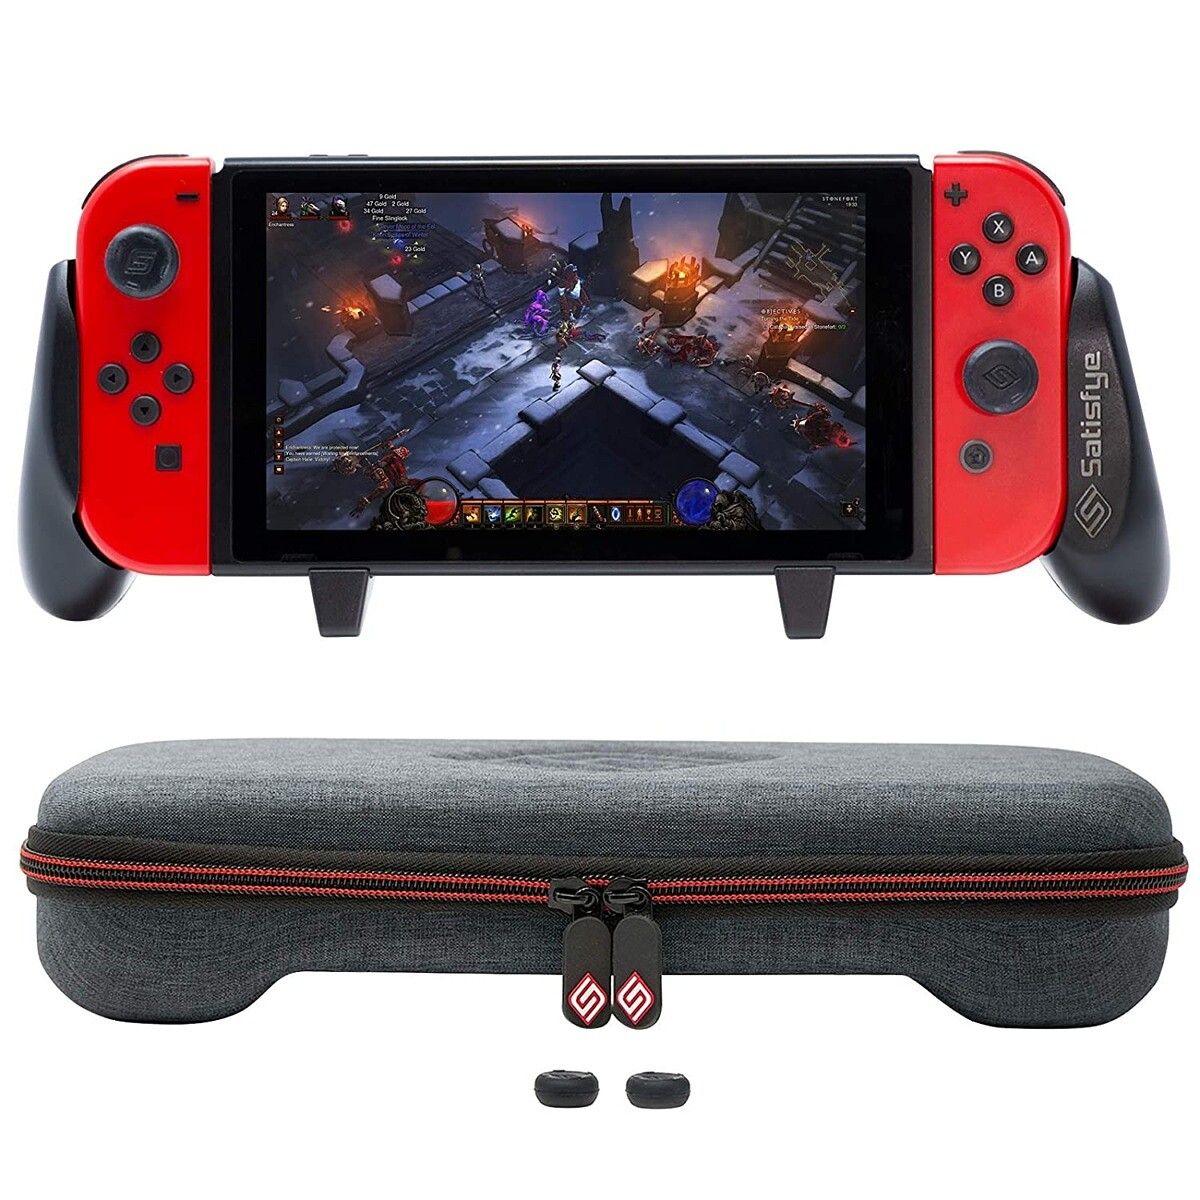 One small problem with Switch grips is that they don't really fit the Switch cases you can buy. Resolve that issue by getting the Satisfye grip and case bundle. The case allows you to store ten extra Switch games while protecting the screen.